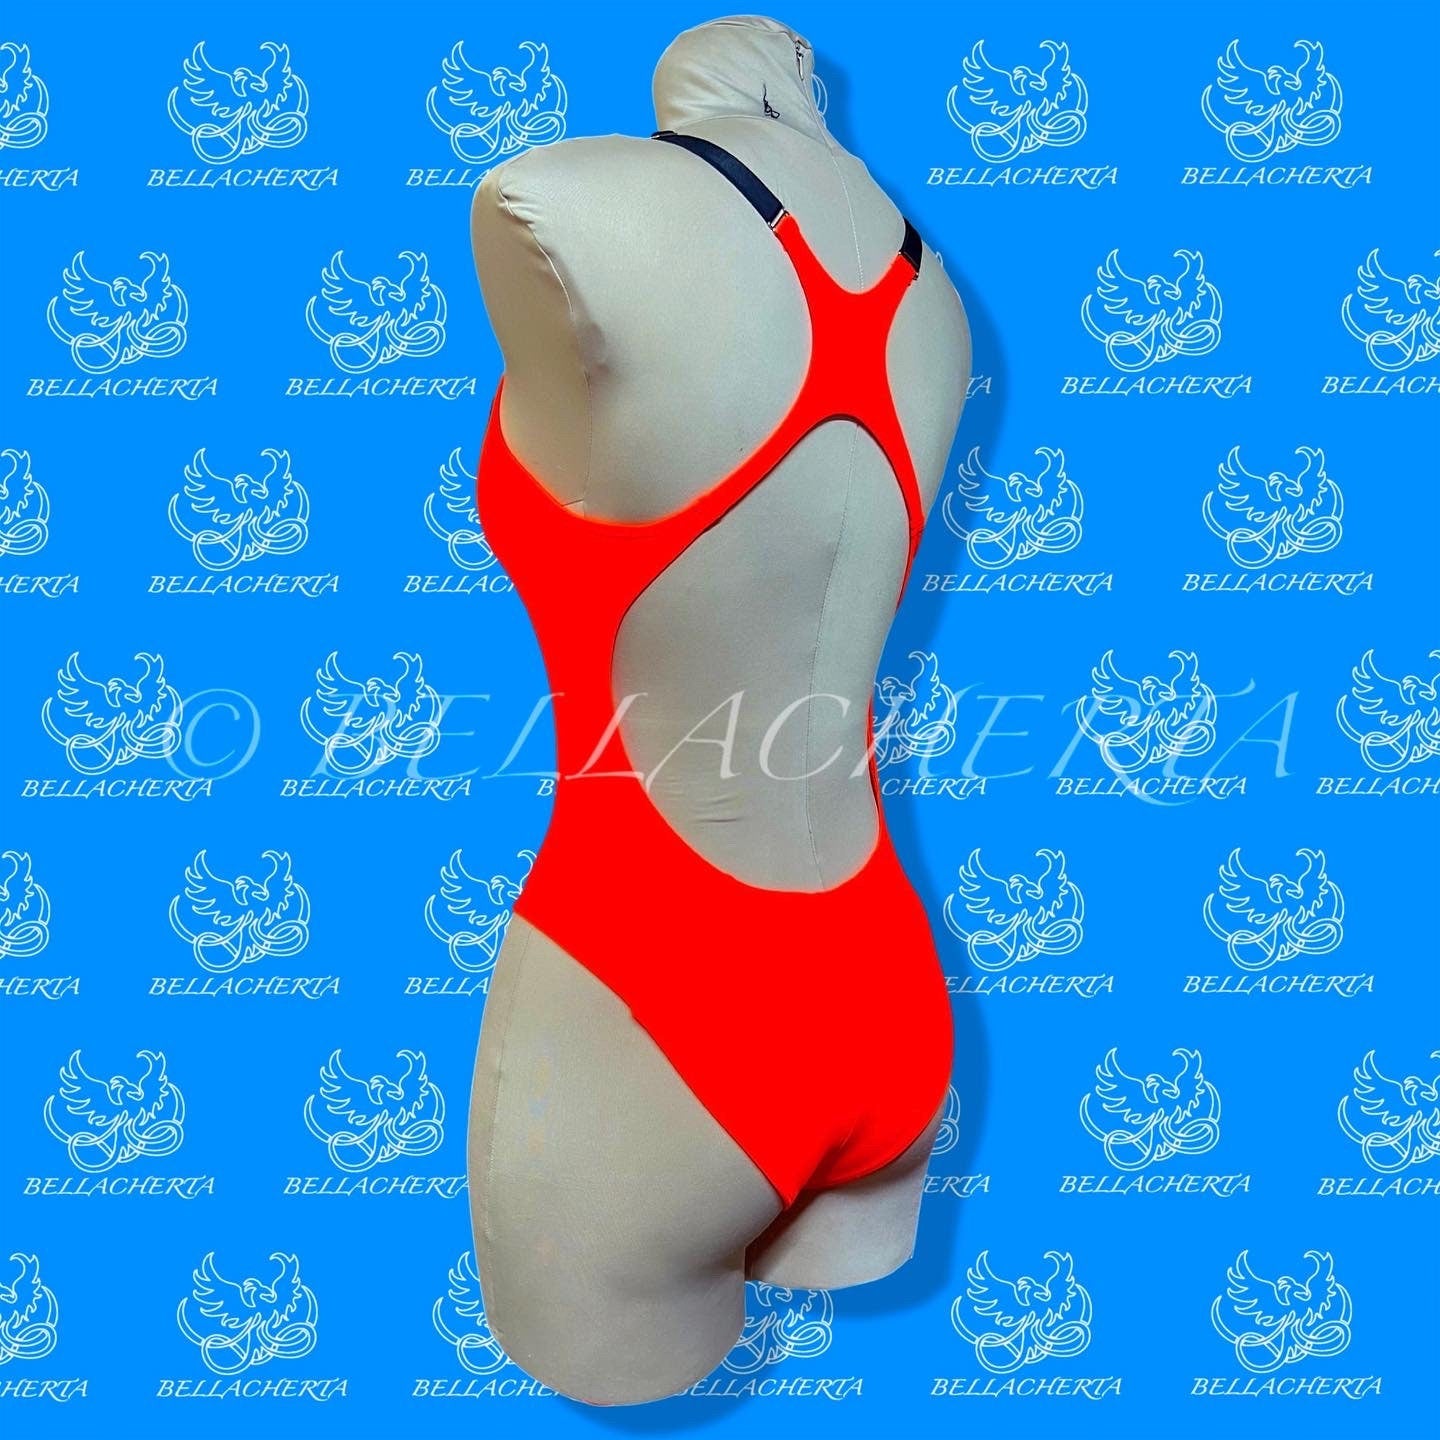 Neon-bright One-piece Swimsuit With Adjustable Straps